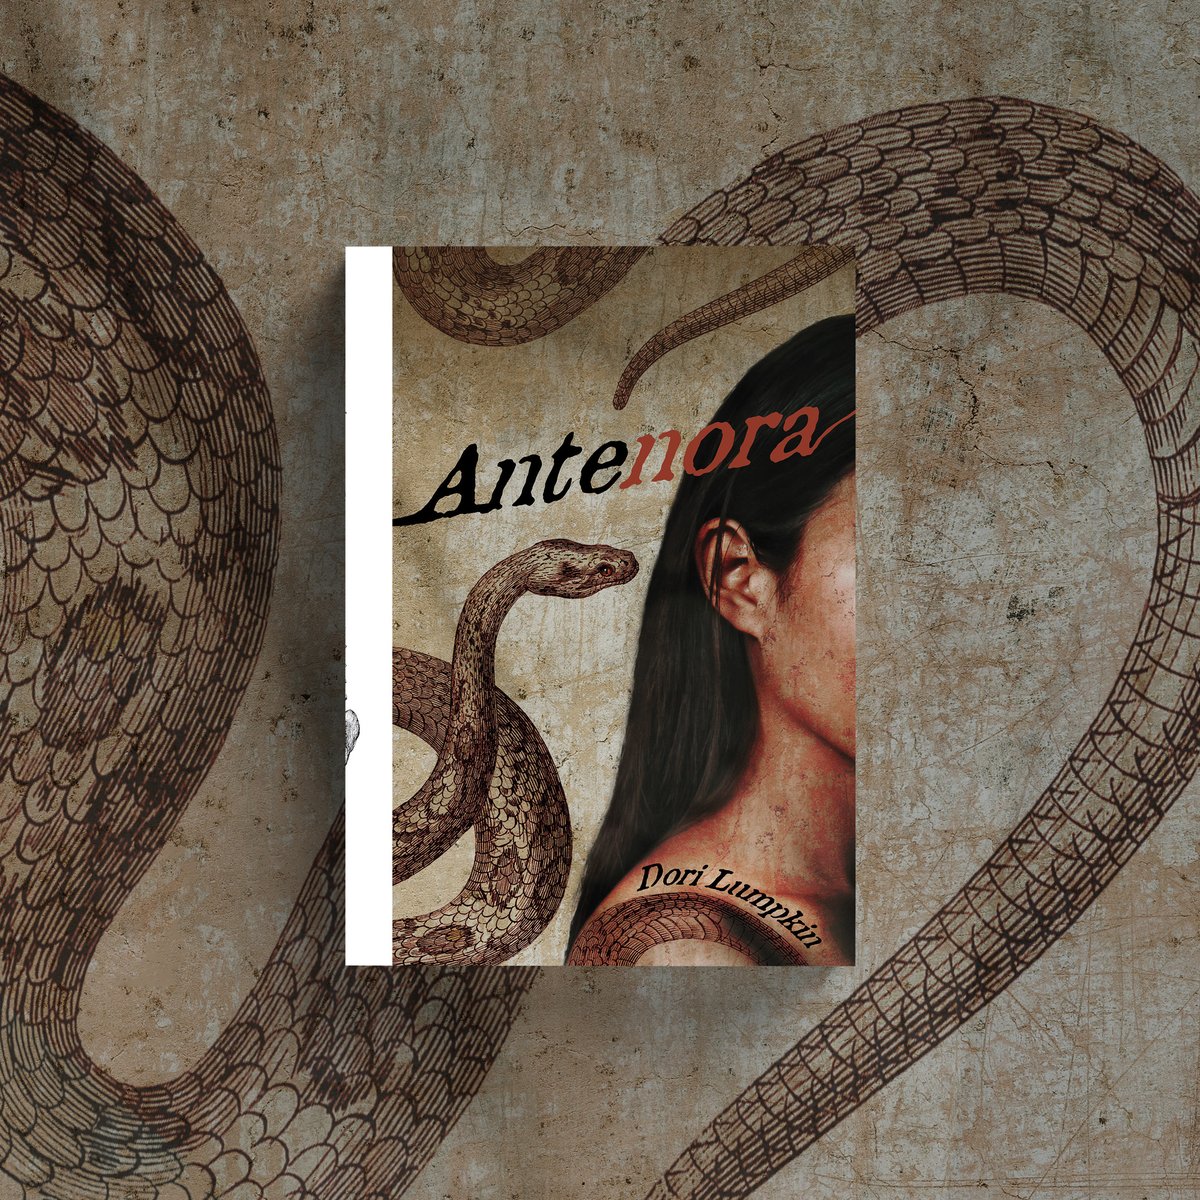 🐍COVER REVEAL for ANTENORA, Dori Lumpkin’s debut novella Many thanks to Rachel Kelli for the slithery cover and @whimsyqueen for the inimitable story Bittersweet romance, anyone? Publishing Oct. 1 from Creature